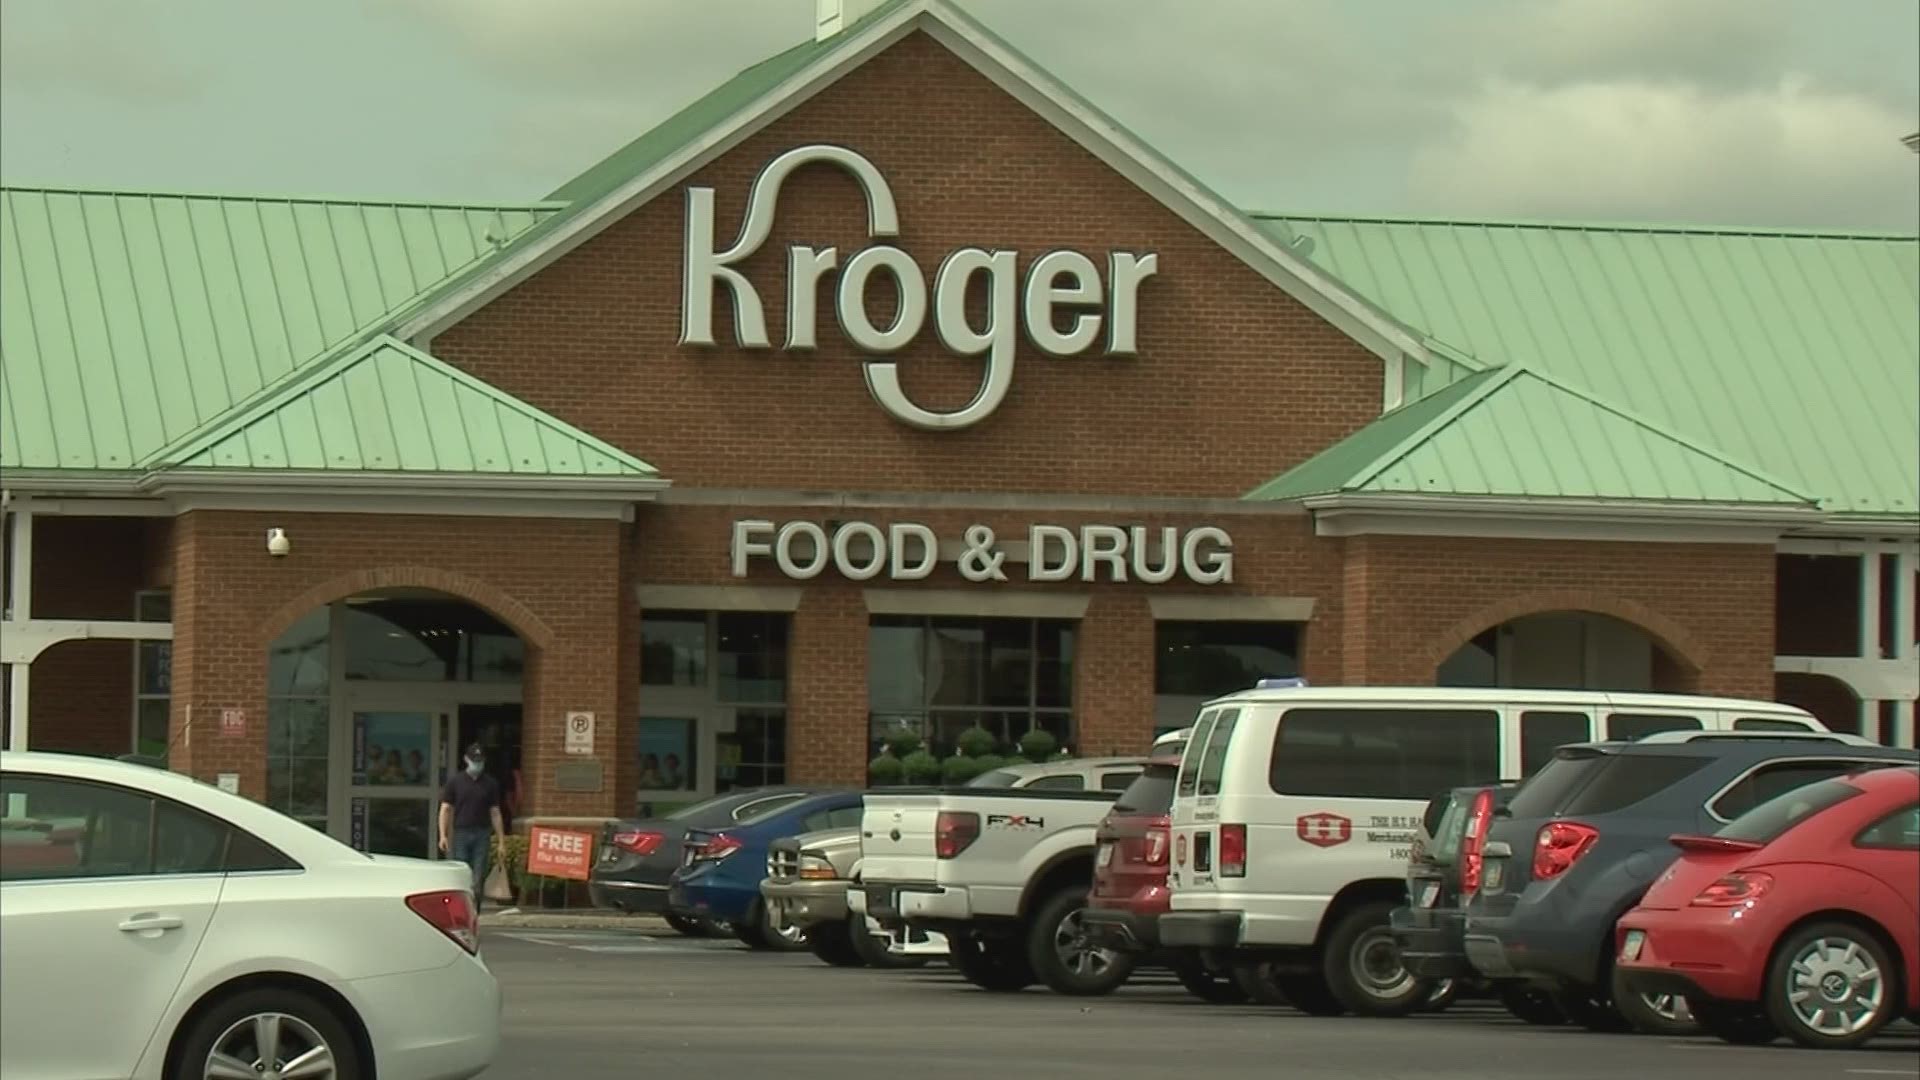 When contacted, a spokesperson for Kroger said the company wants all of its employees to feel supported and heard.